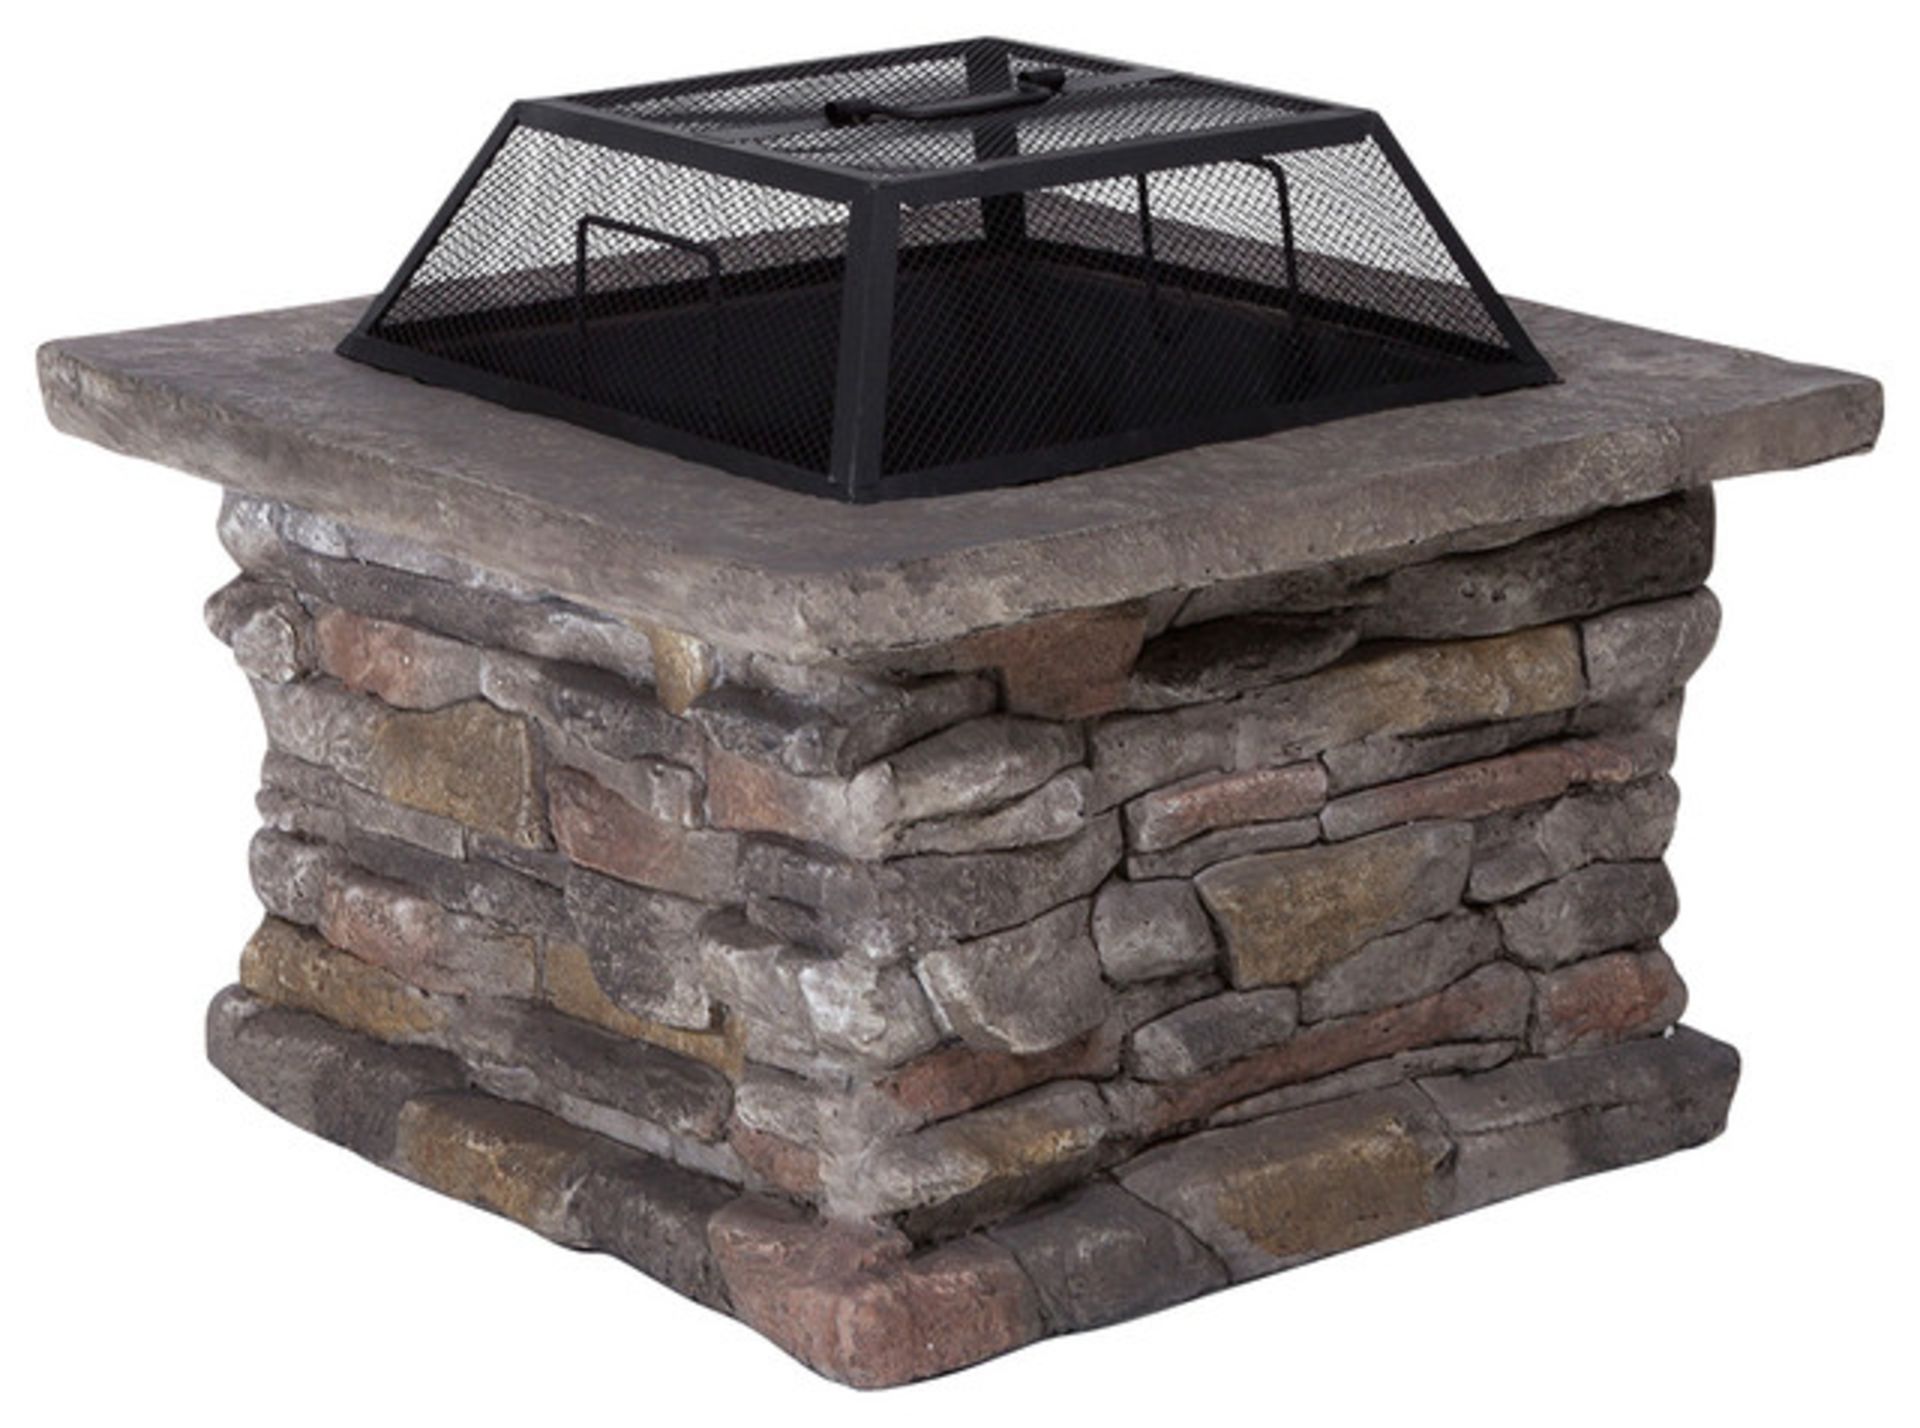 V *TRADE QTY* Brand New Square Wood Burning Firepit 74 x 74 x 58 cm (WxDxH) Includes Fire Bowl,